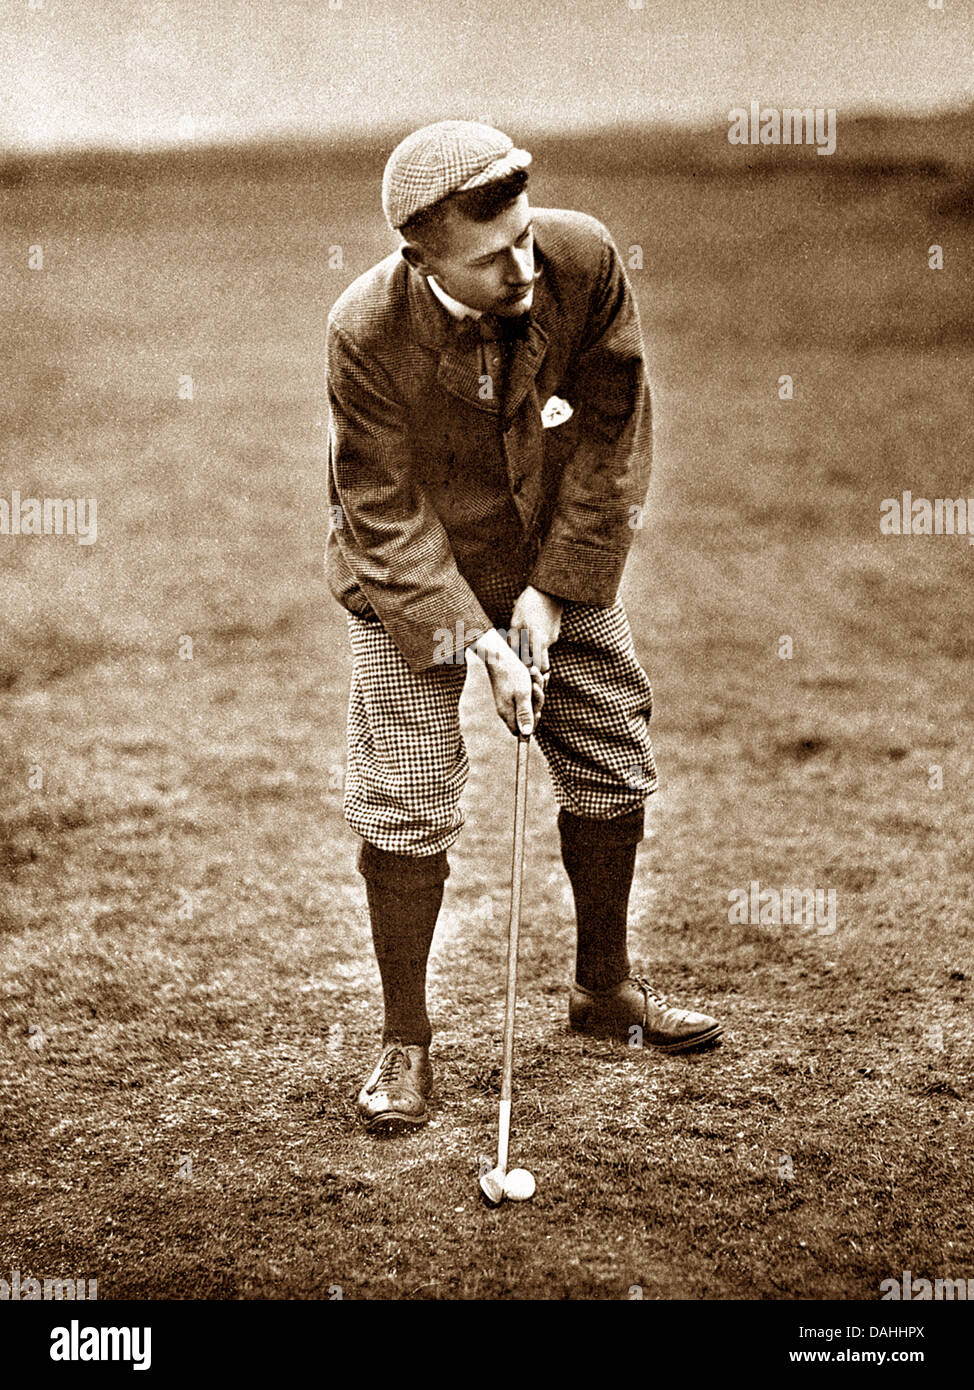 Vintage Golf High Resolution Stock Photography and Images - Alamy